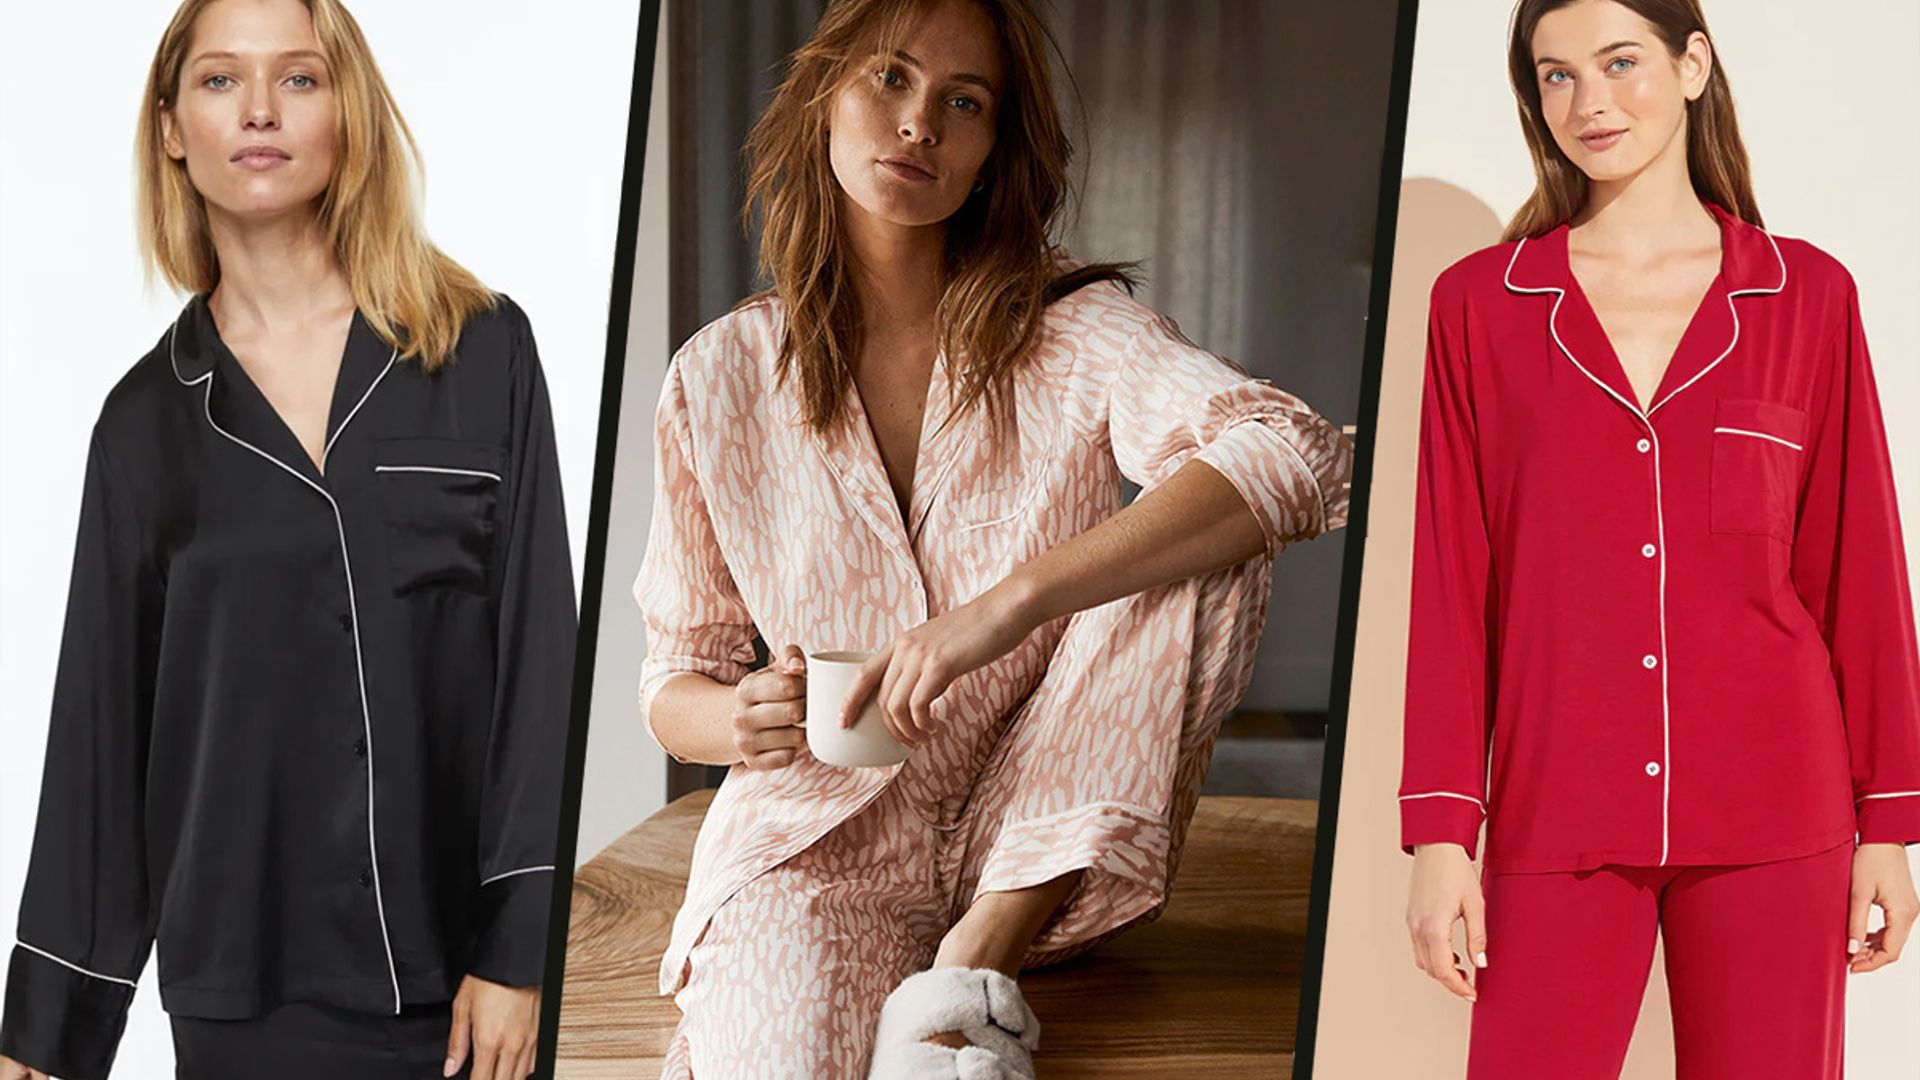 13 best pyjamas for women 2022: Stylish PJs from M&S, Topshop, H&M & MORE